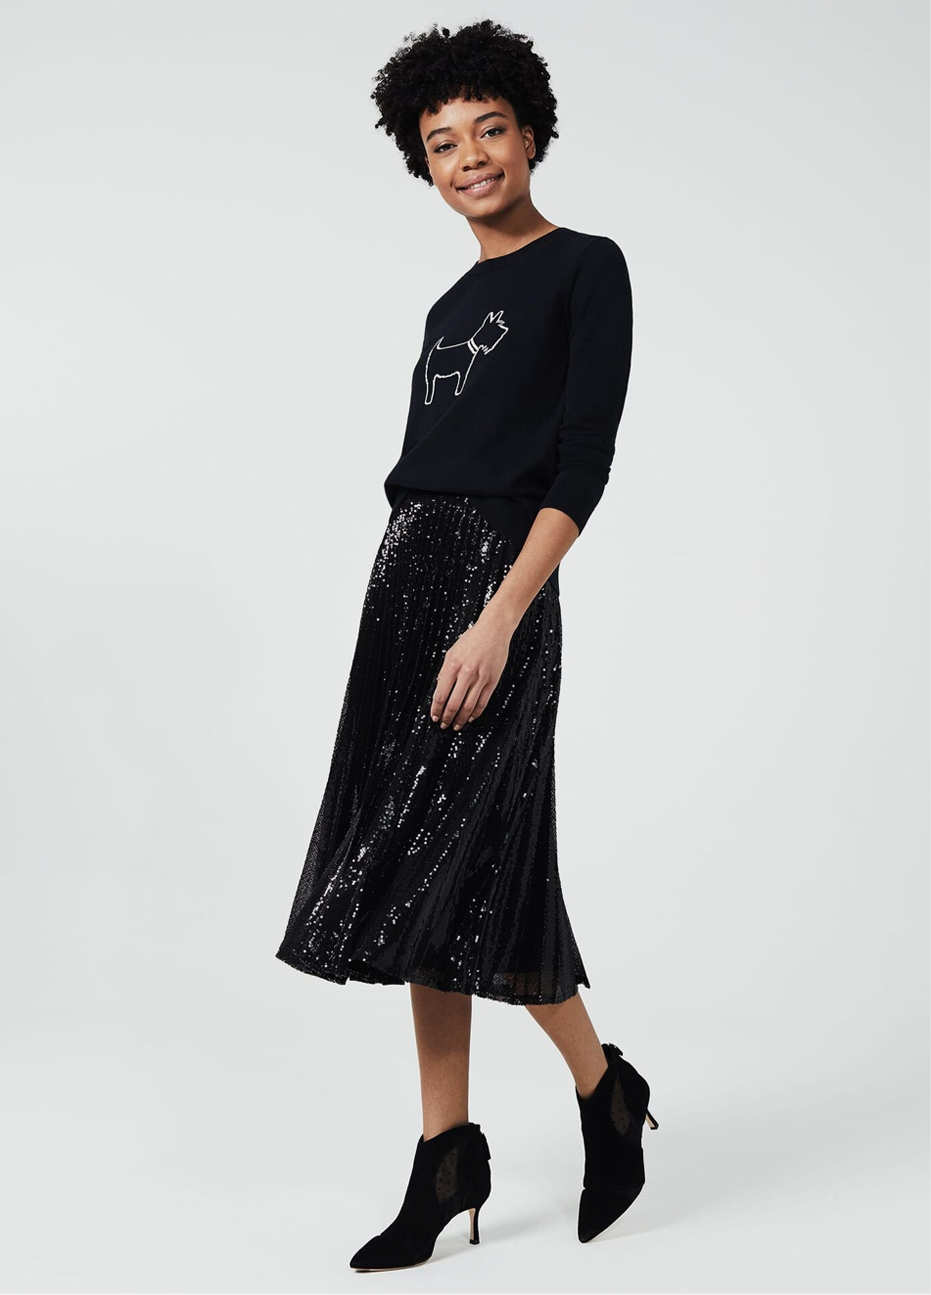 Hobbs model wearing a fun knitted jumper featuring illustration of a dog, styled with a sequin skirt with black pointed suede boots.